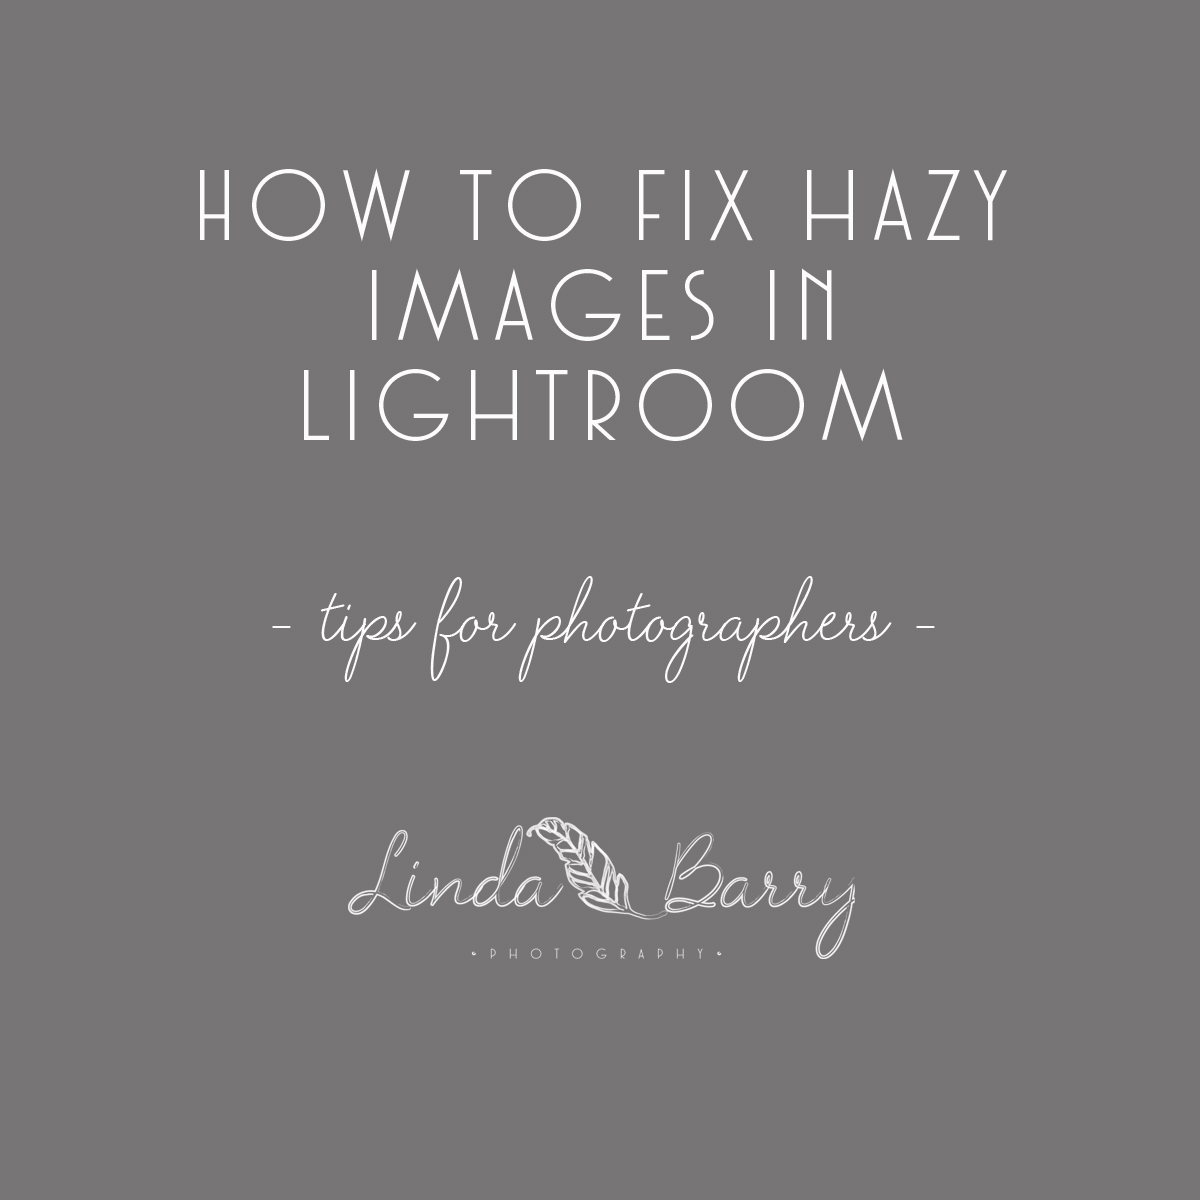 Lightroom editing trick by Linda Barry Photography